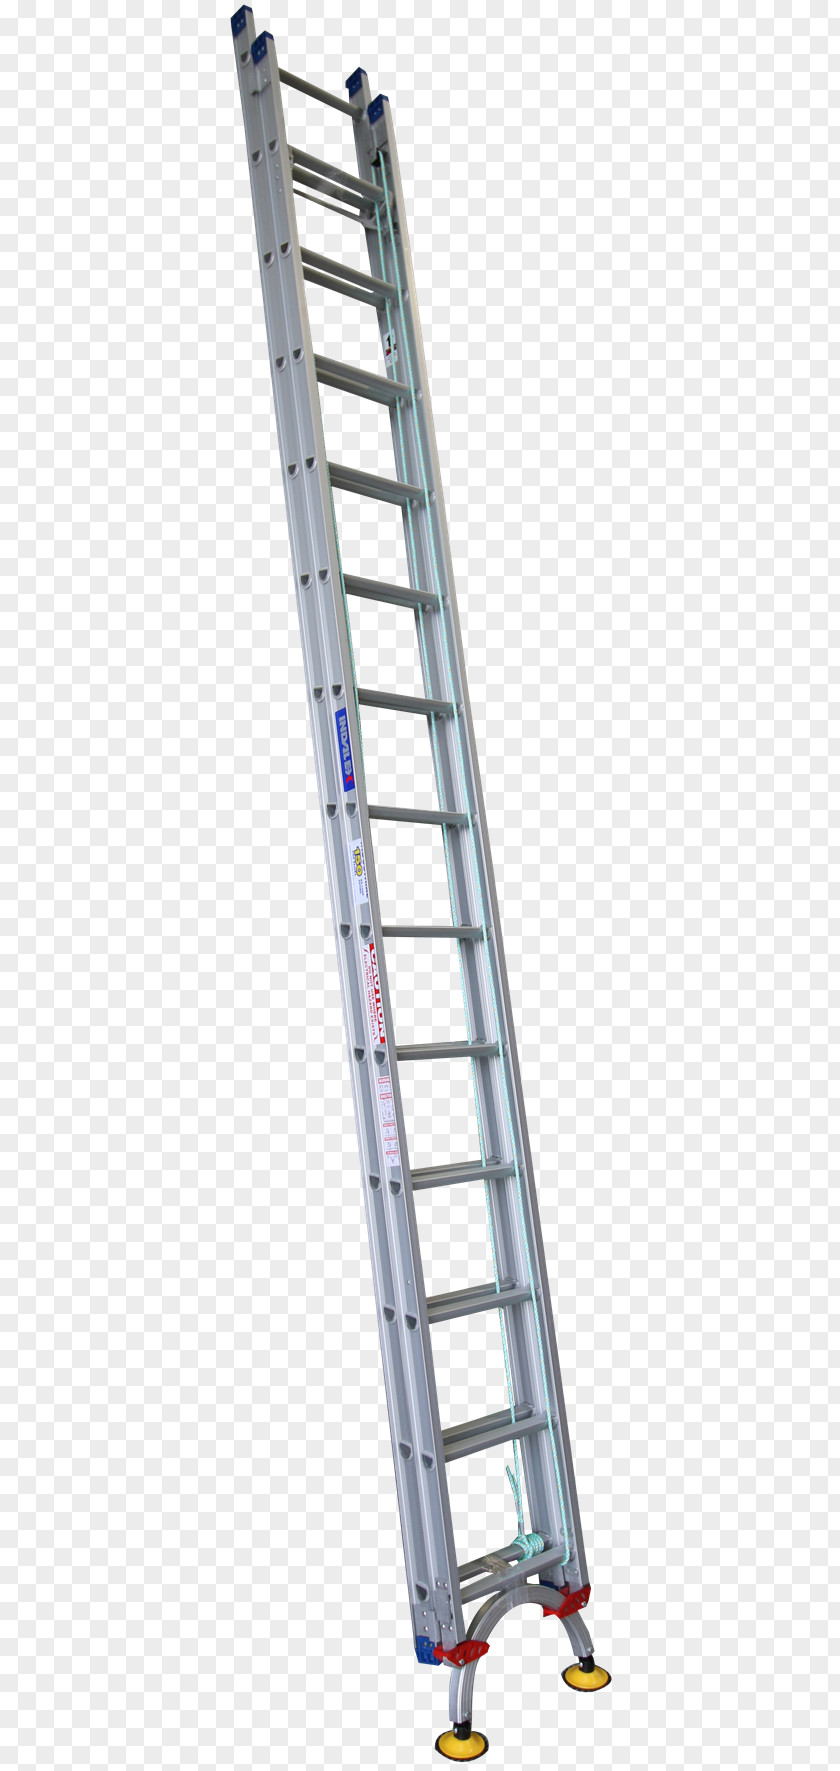 Ladder Weight Ratings Scaffolding Aluminium Staircases Fiberglass PNG